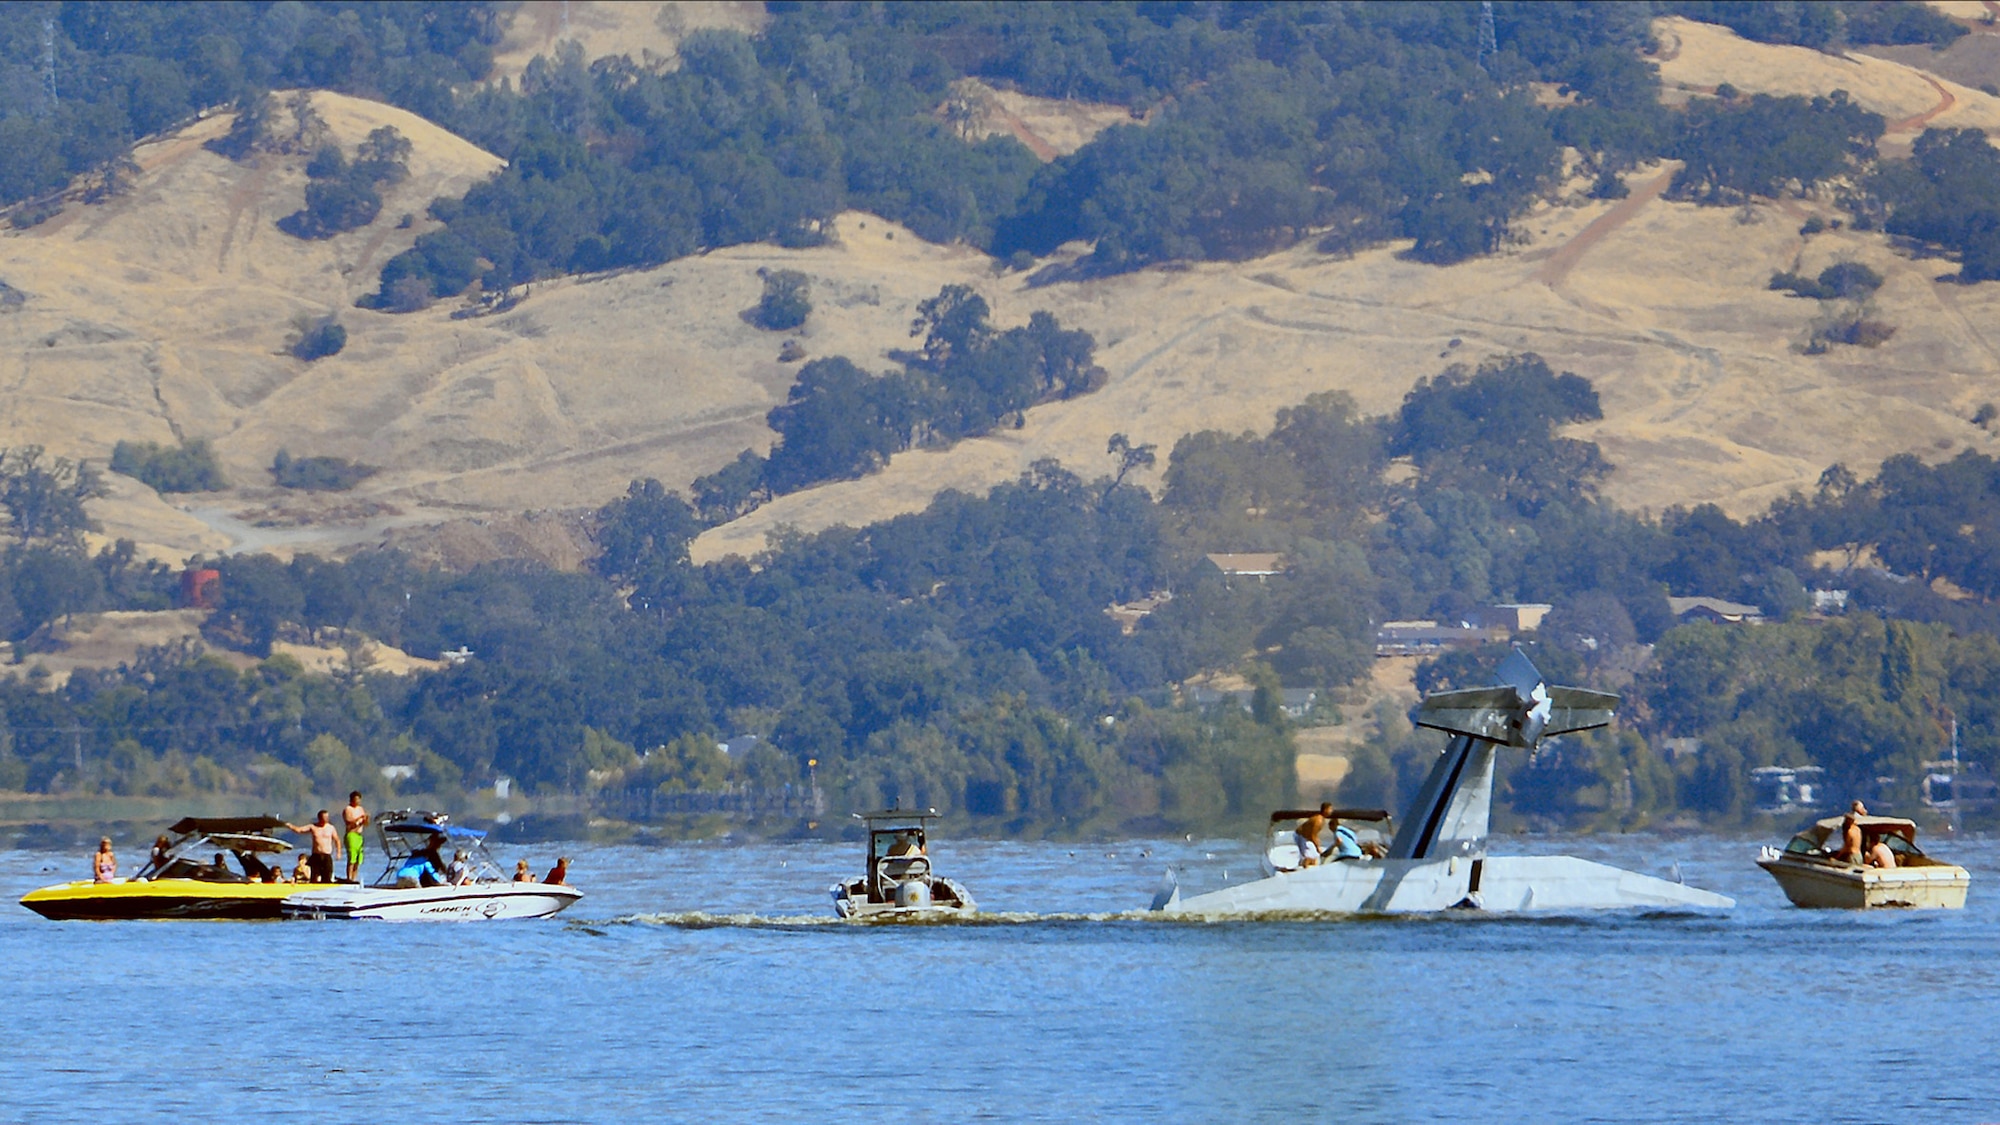 Two men were injured in a seaplane crash on Saturday, September 17, 2016, in Lakeport, Calif., during the annual Clear Lake Seaplane Splash In. Photo courtesy of Ron Keas.